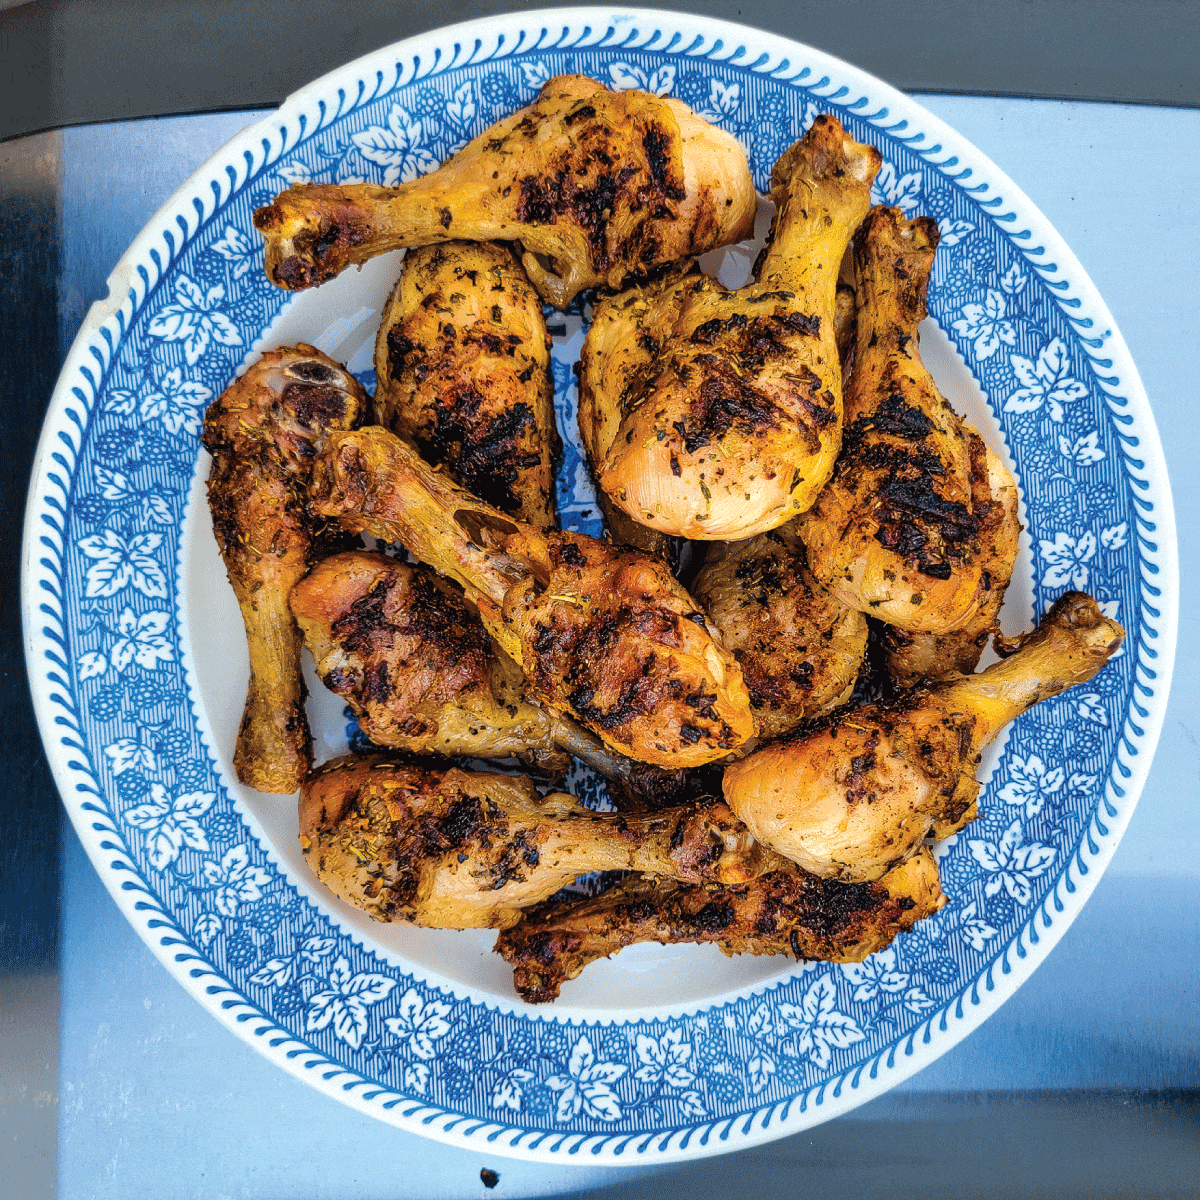 chicken legs on a plate after being grilled ready to serve